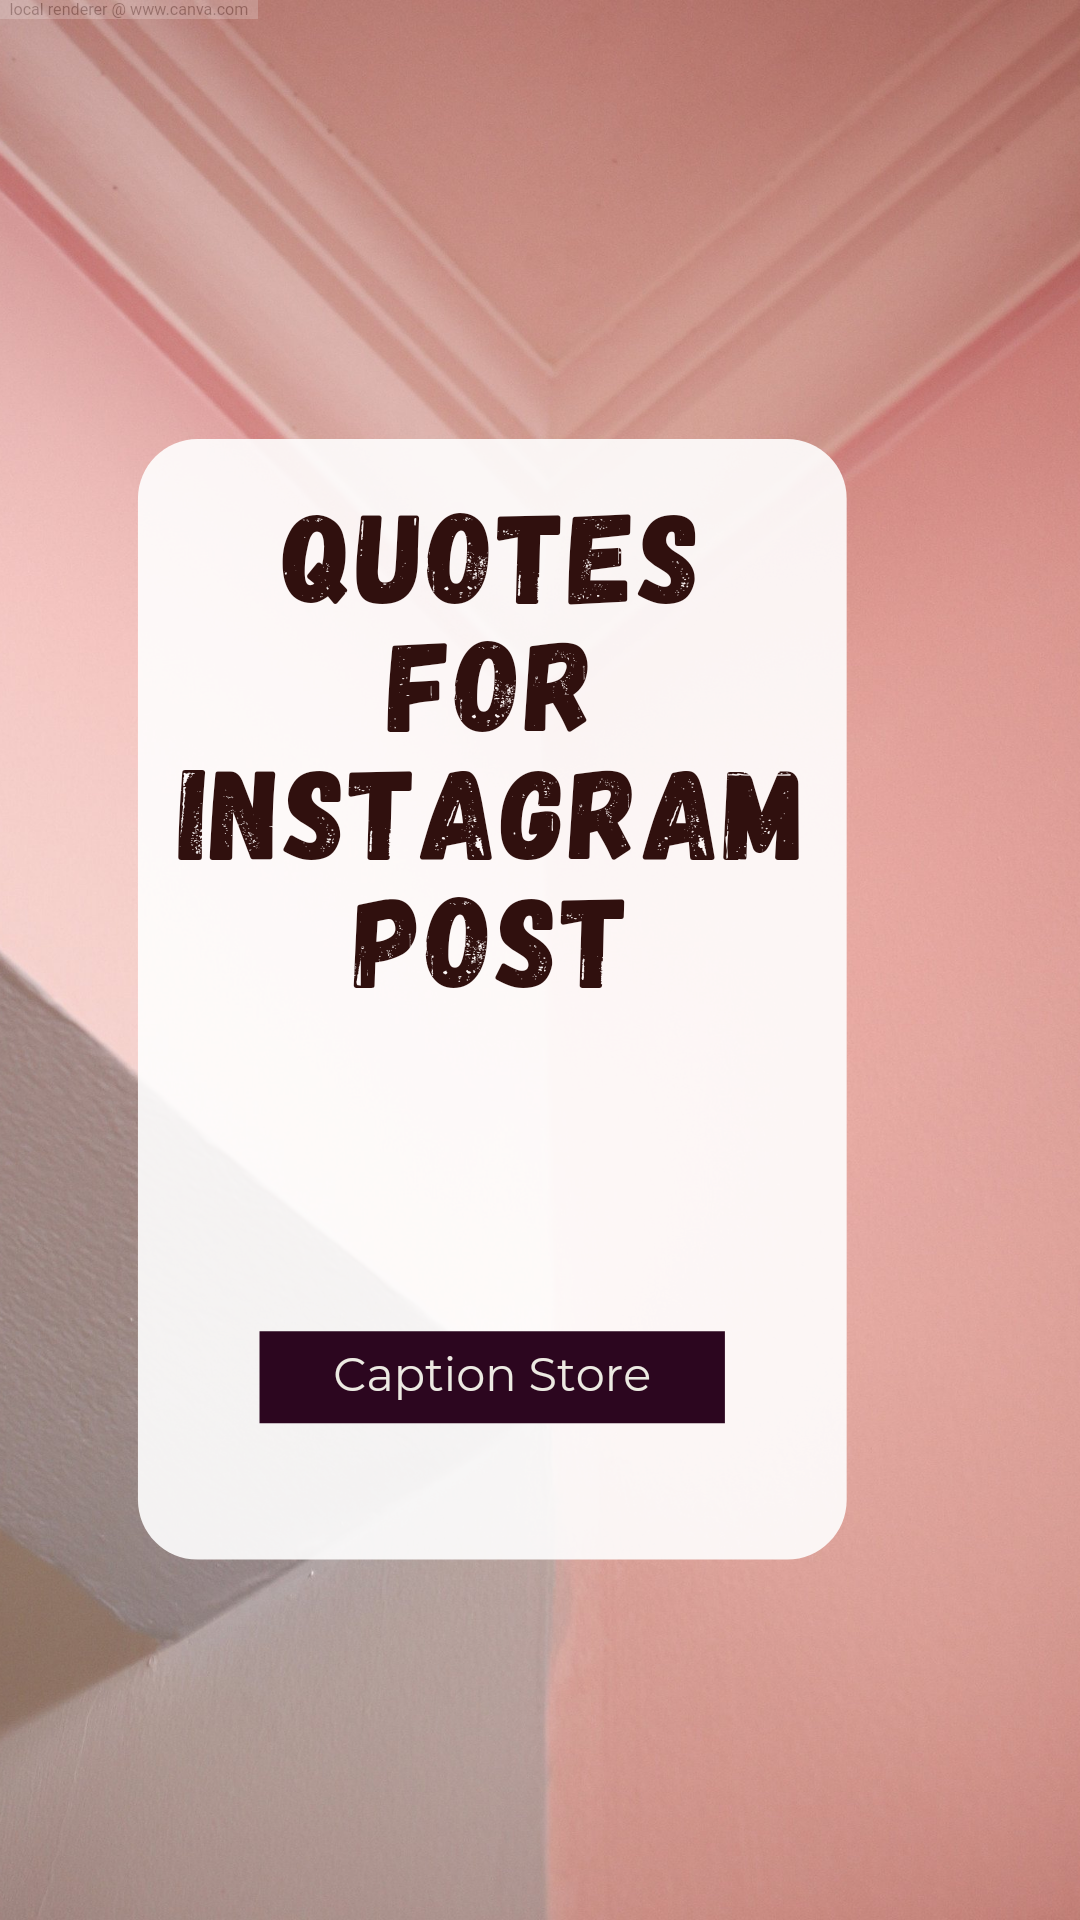 Quotes for Instagram post